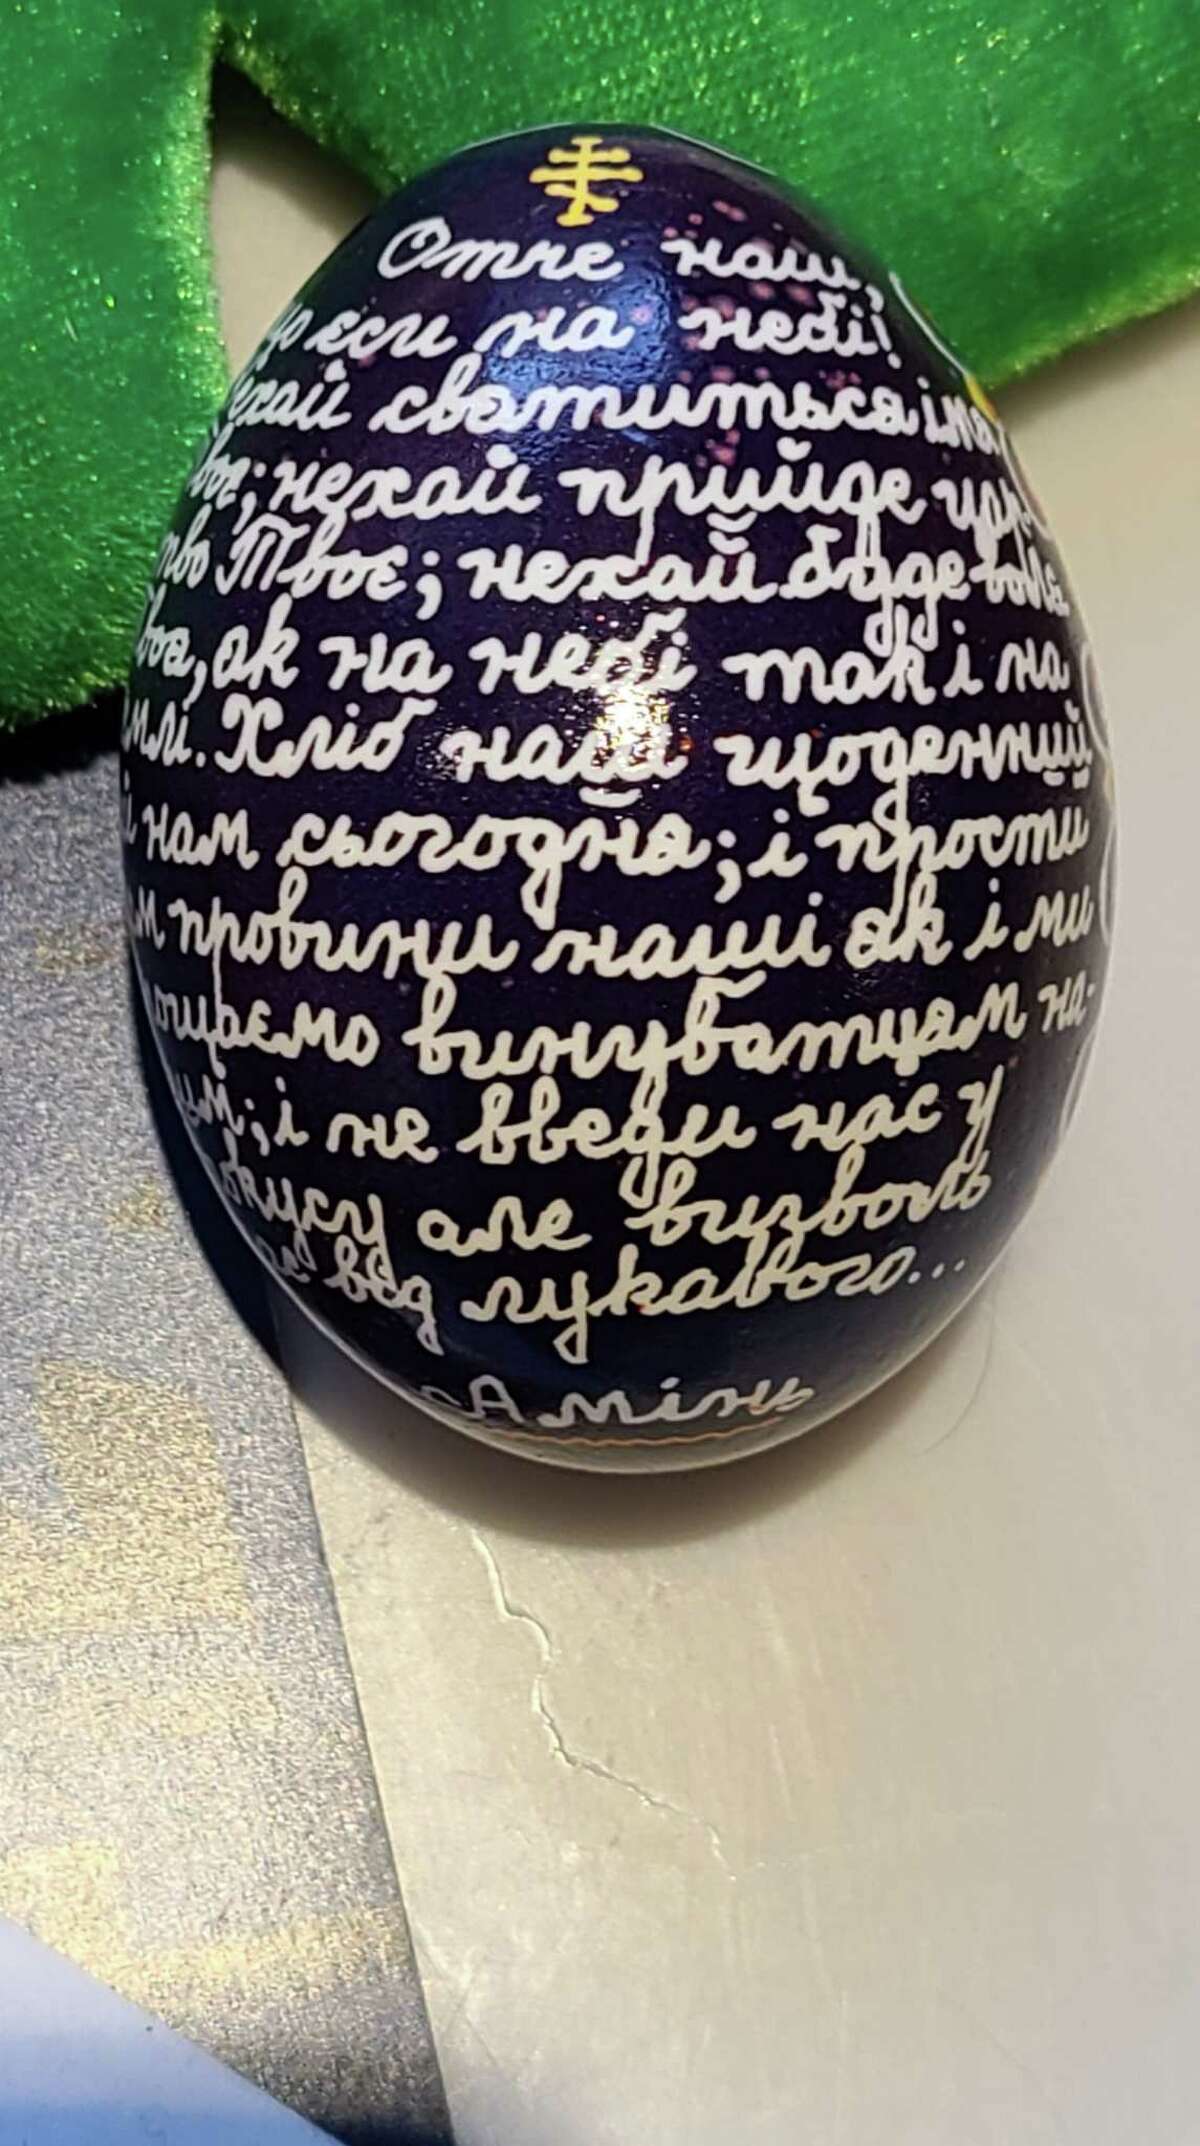 Kim Mathias, of Westport, has her mother’s collection of Ukrainian Easter eggs. This one has the Lord’s Prayer on it.